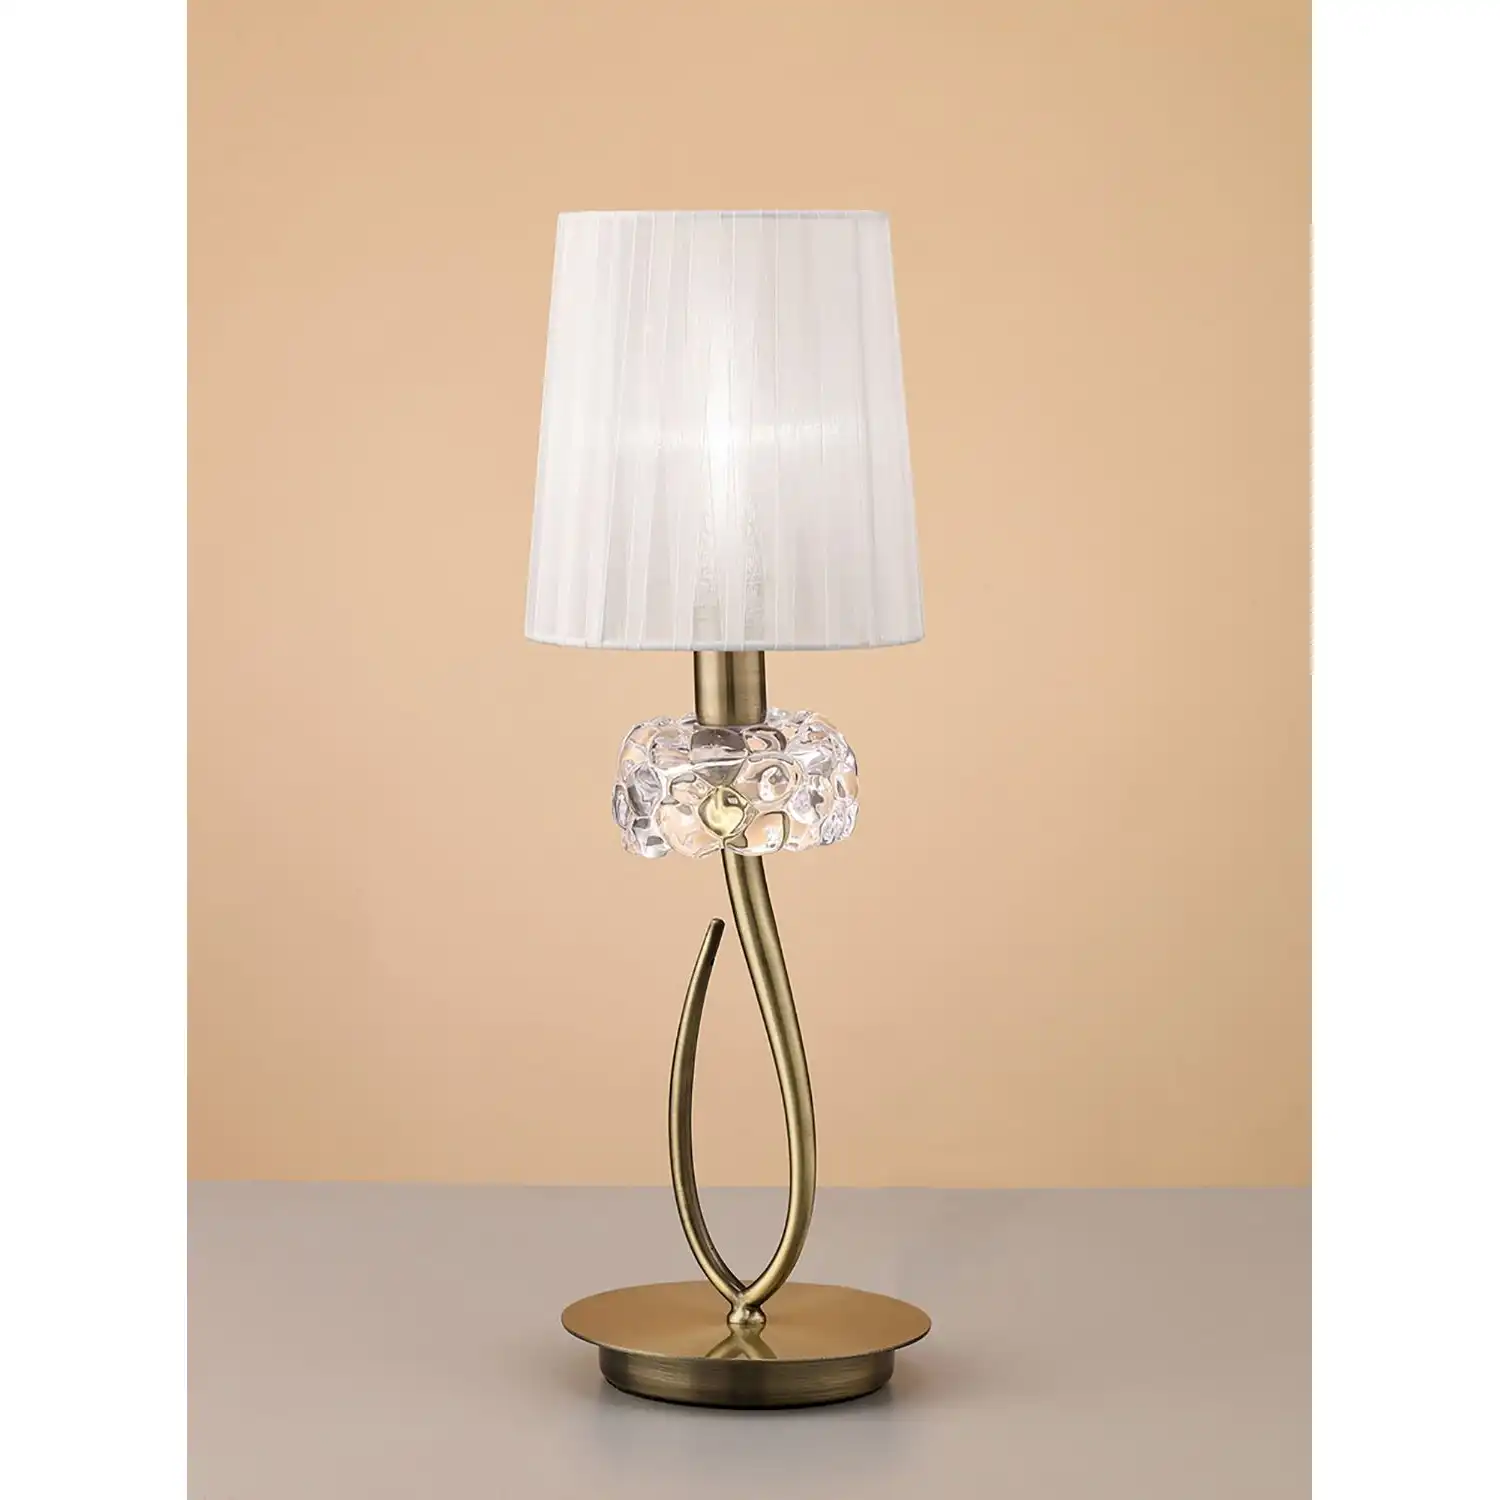 Loewe Table Lamp 1 Light E14 Small, Antique Brass With White Shade